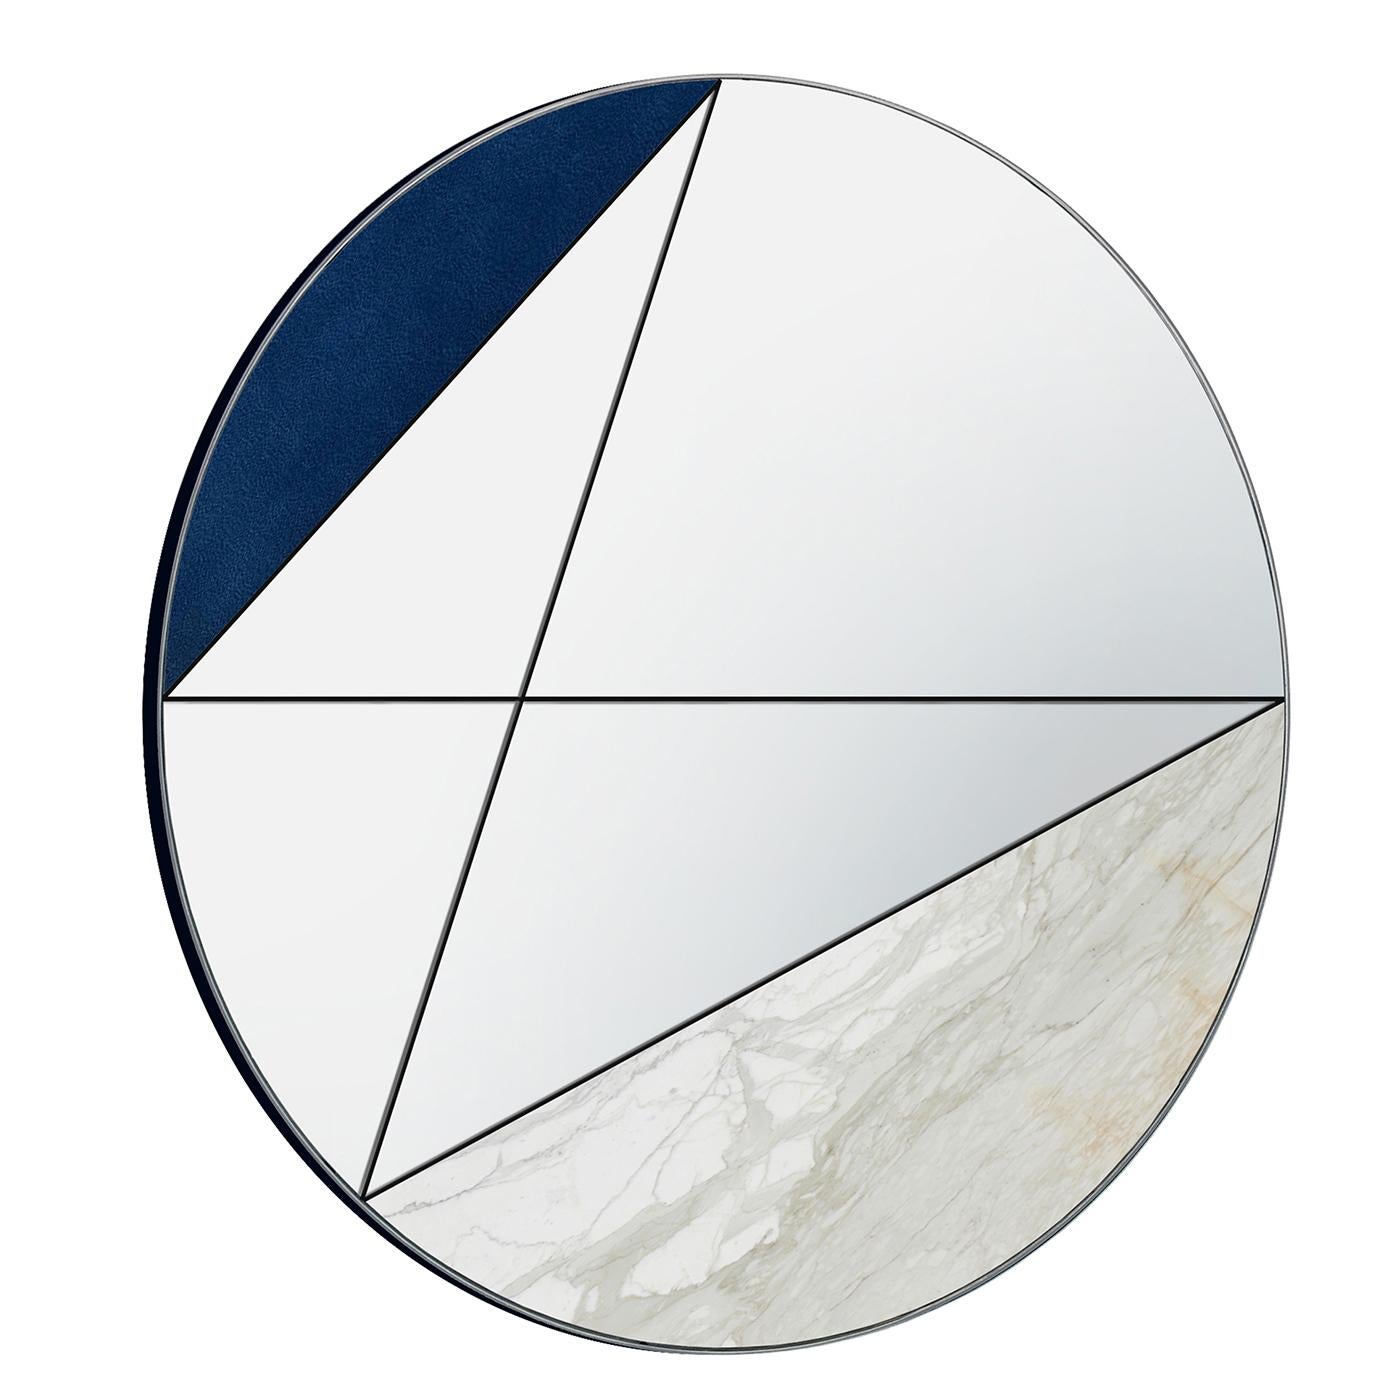 Made entirely by hand, ensuring no two pieces are exactly the same, the Clepsydra I Mirror is characterized by a unique pairing of blue leather and Calacatta marble. The mirror is completed by its signature stainless steel lines, inspired by lives